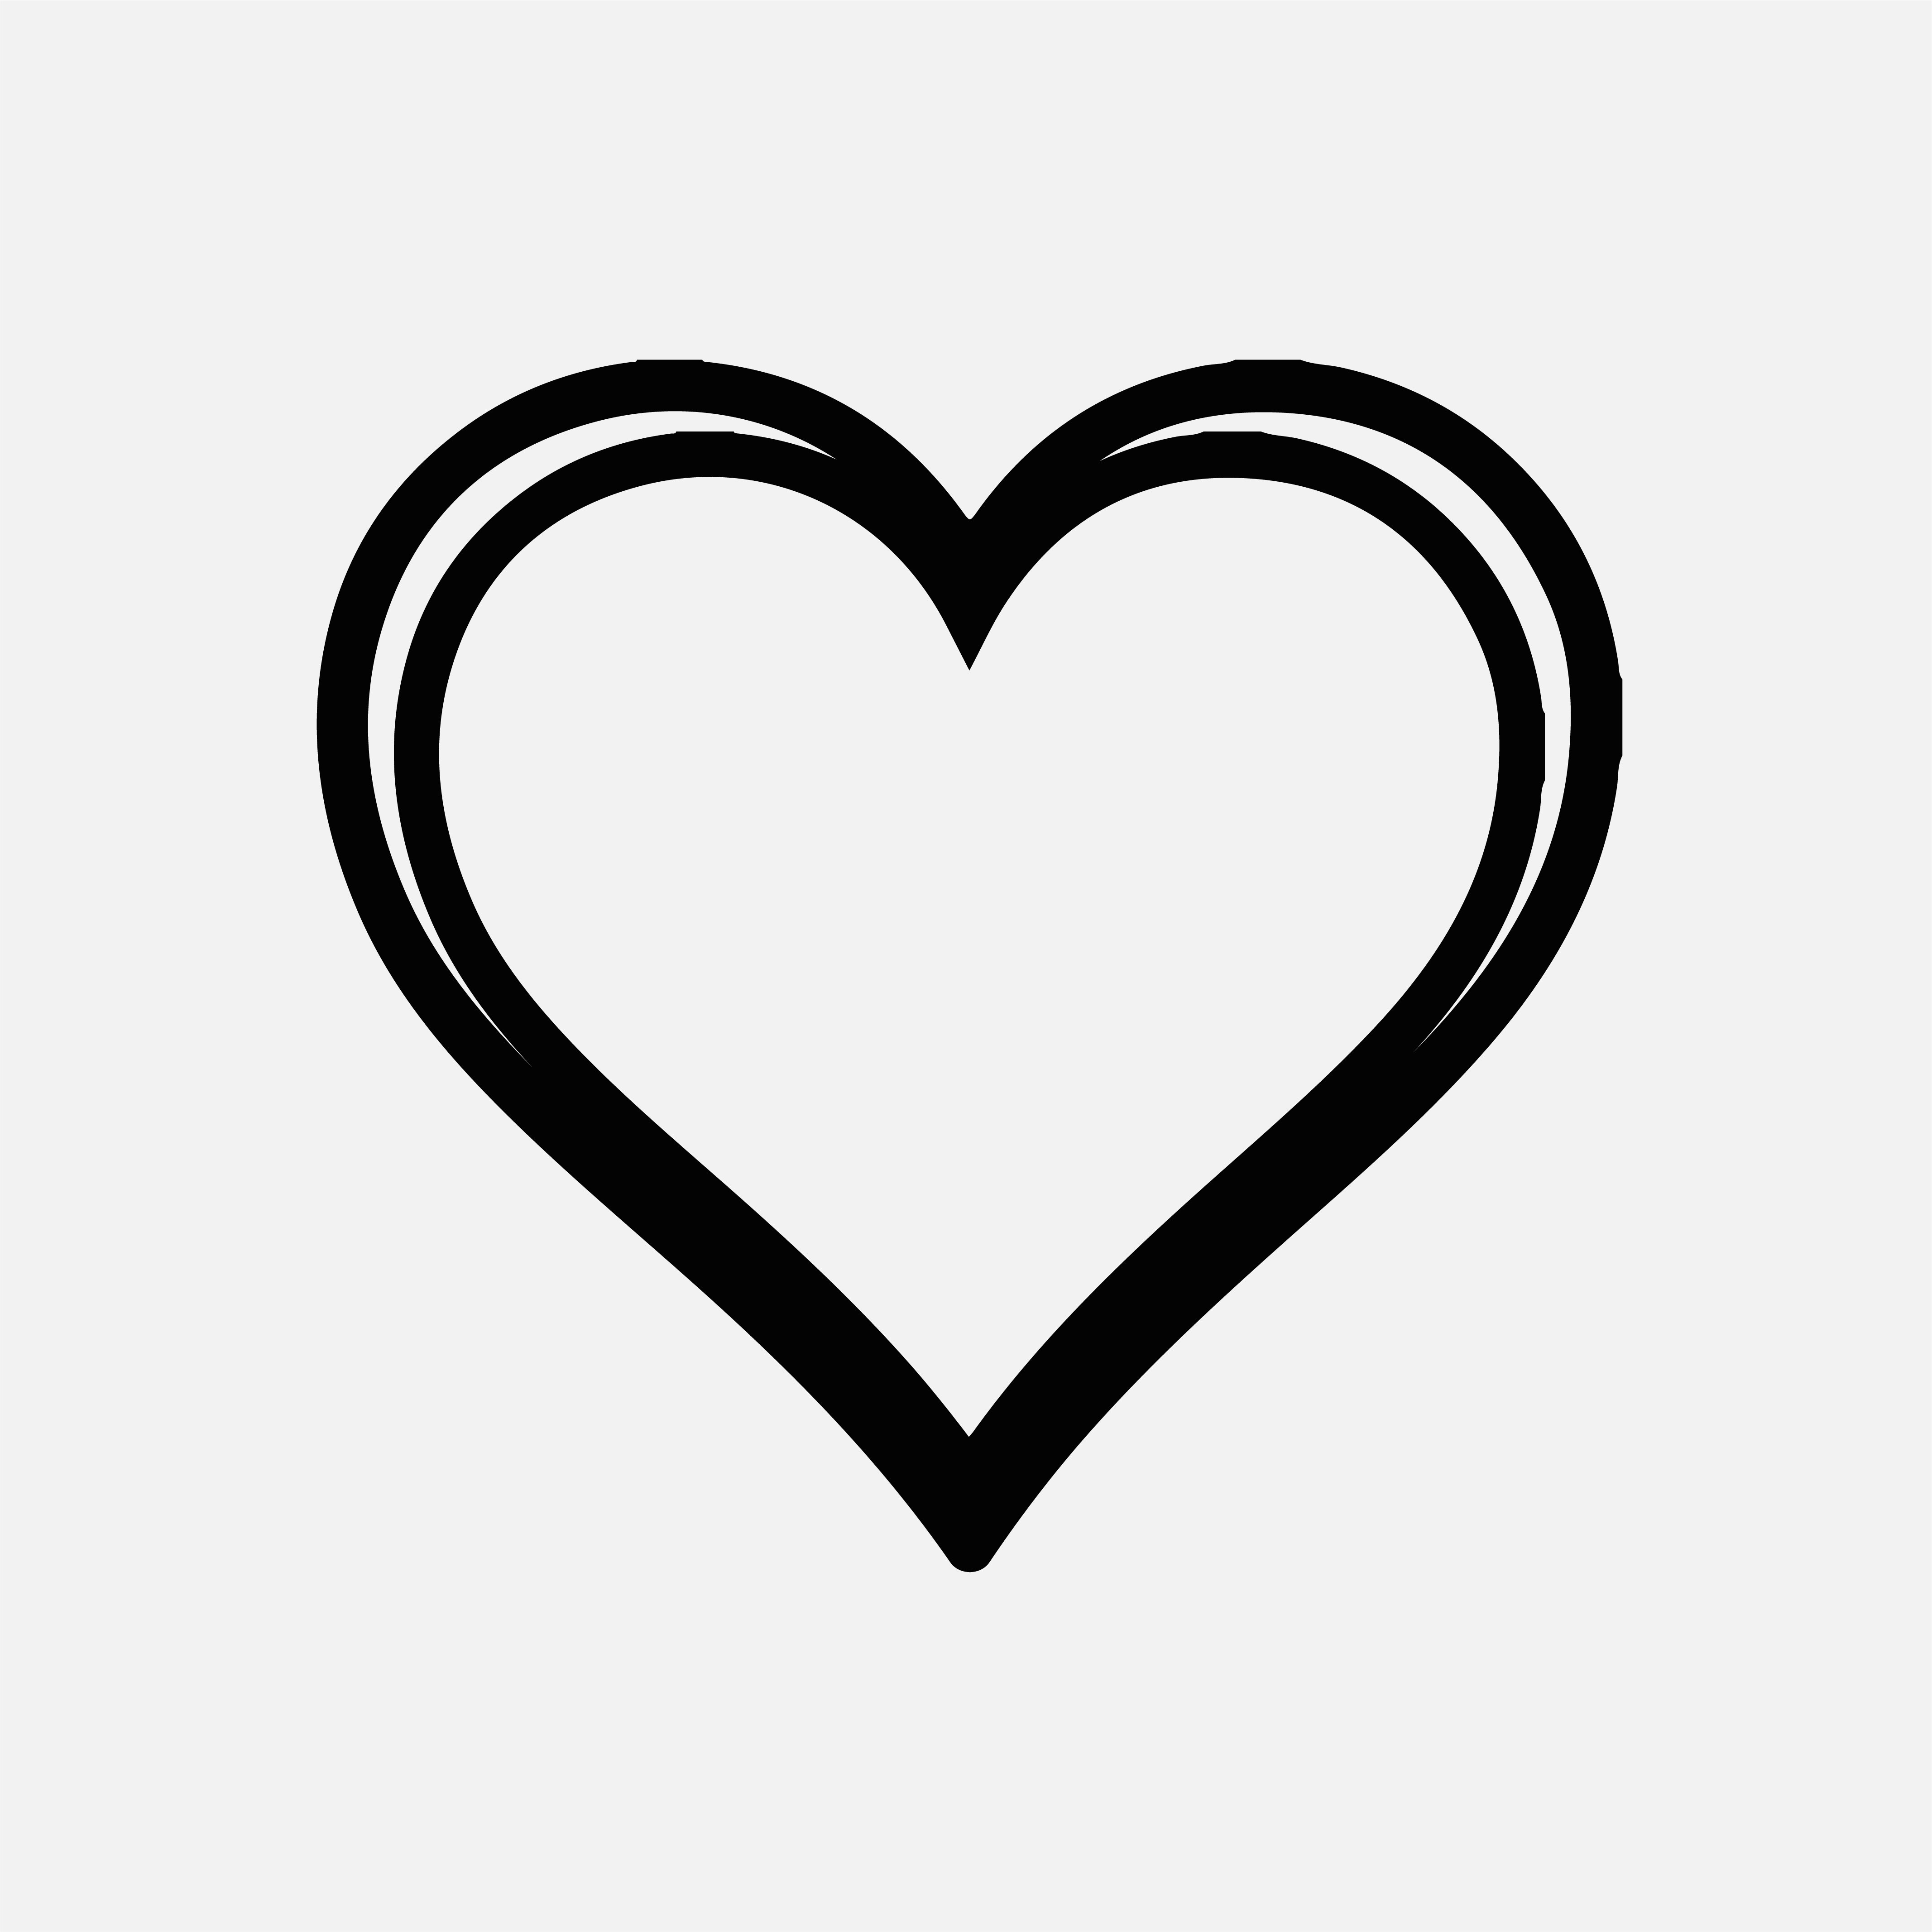 Free Heart Clipart Black And White Outline Eps Illustrator Png